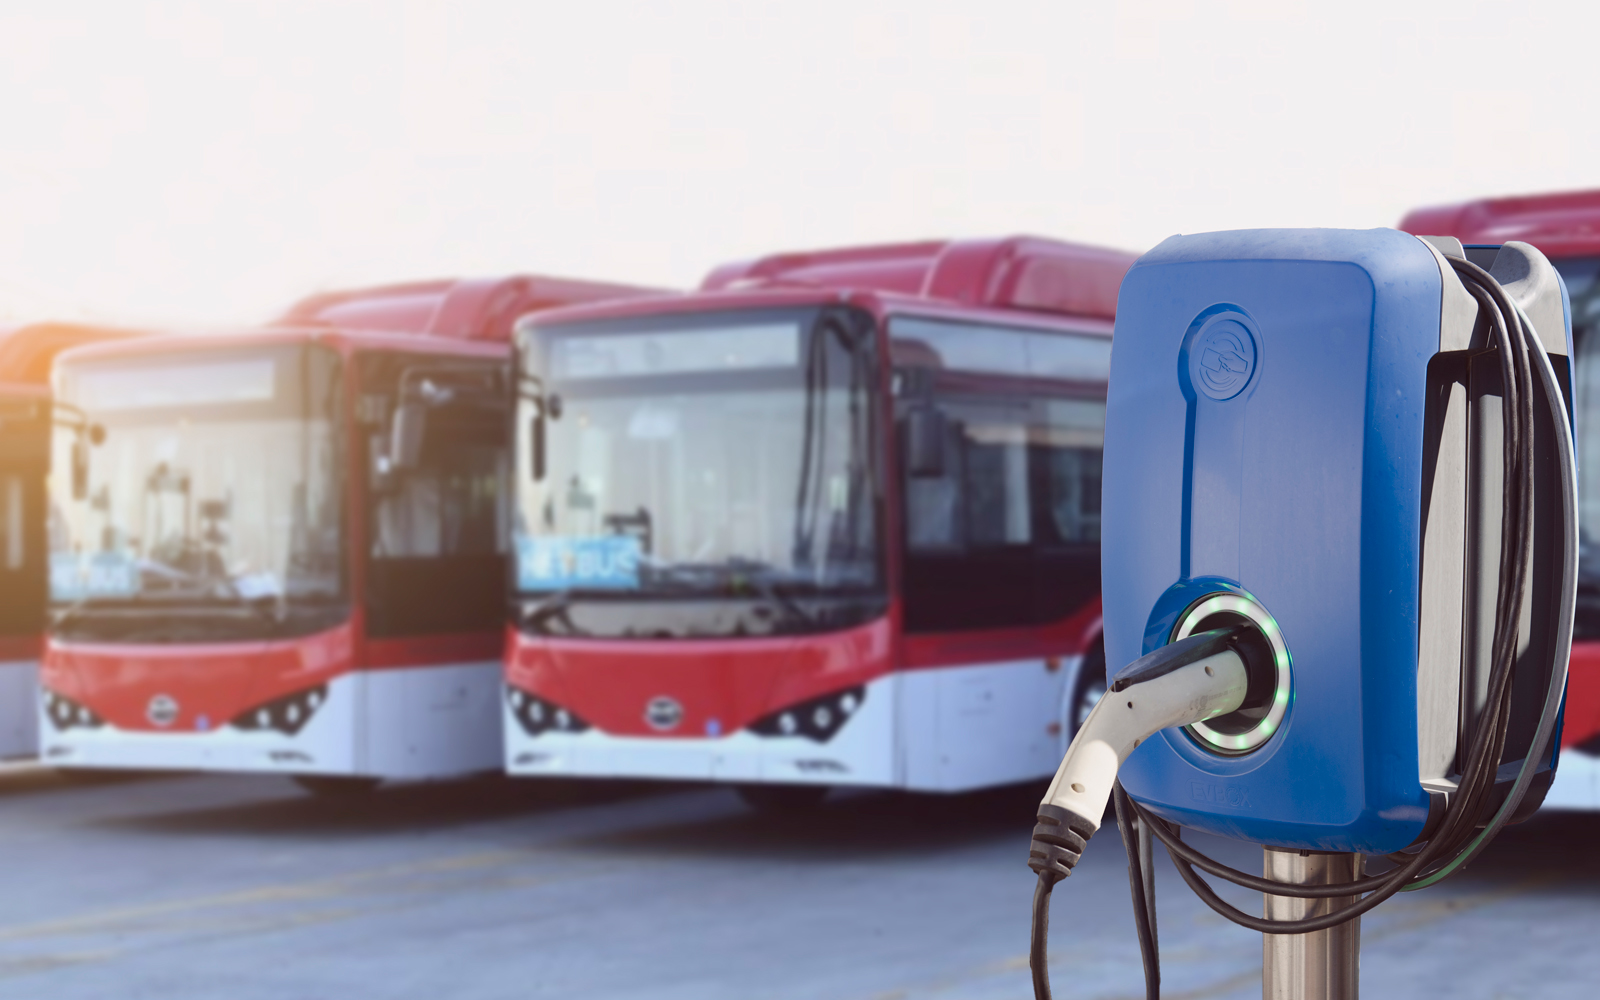 Electric vehicle charging station in front of bus fleet